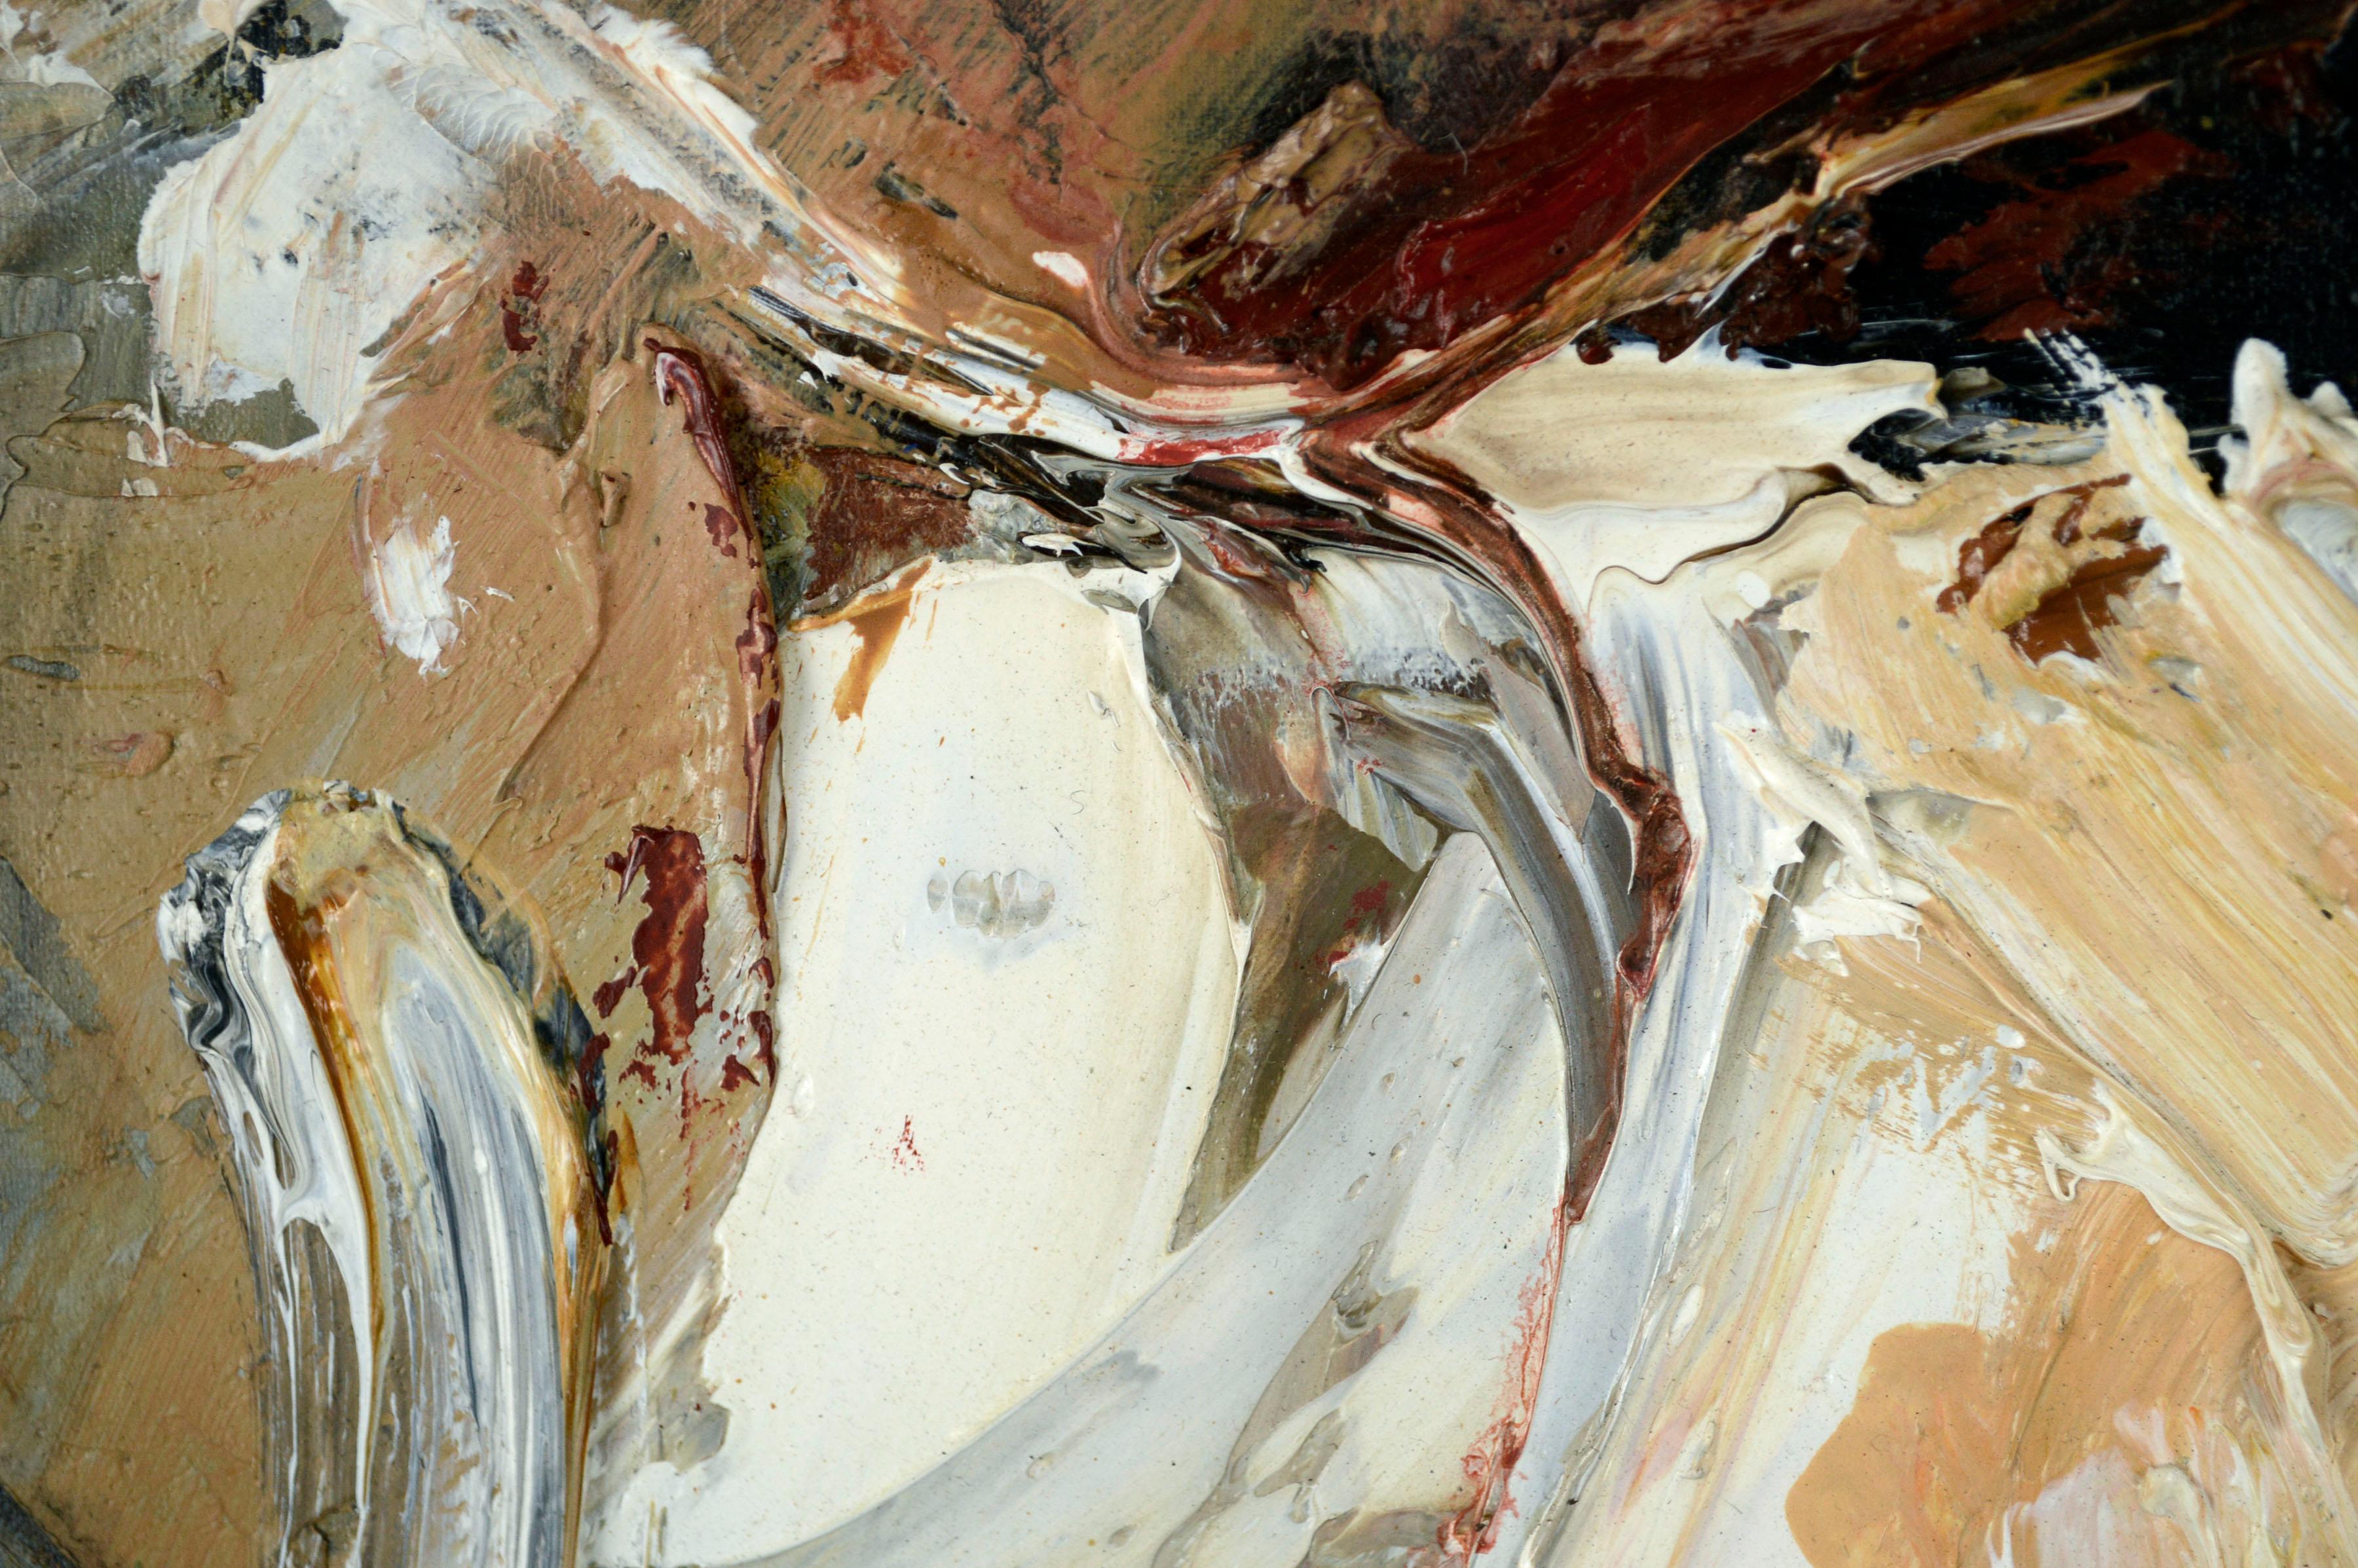 Earth-tone Abstract Expressionist with Impasto & Textured Fibers 1